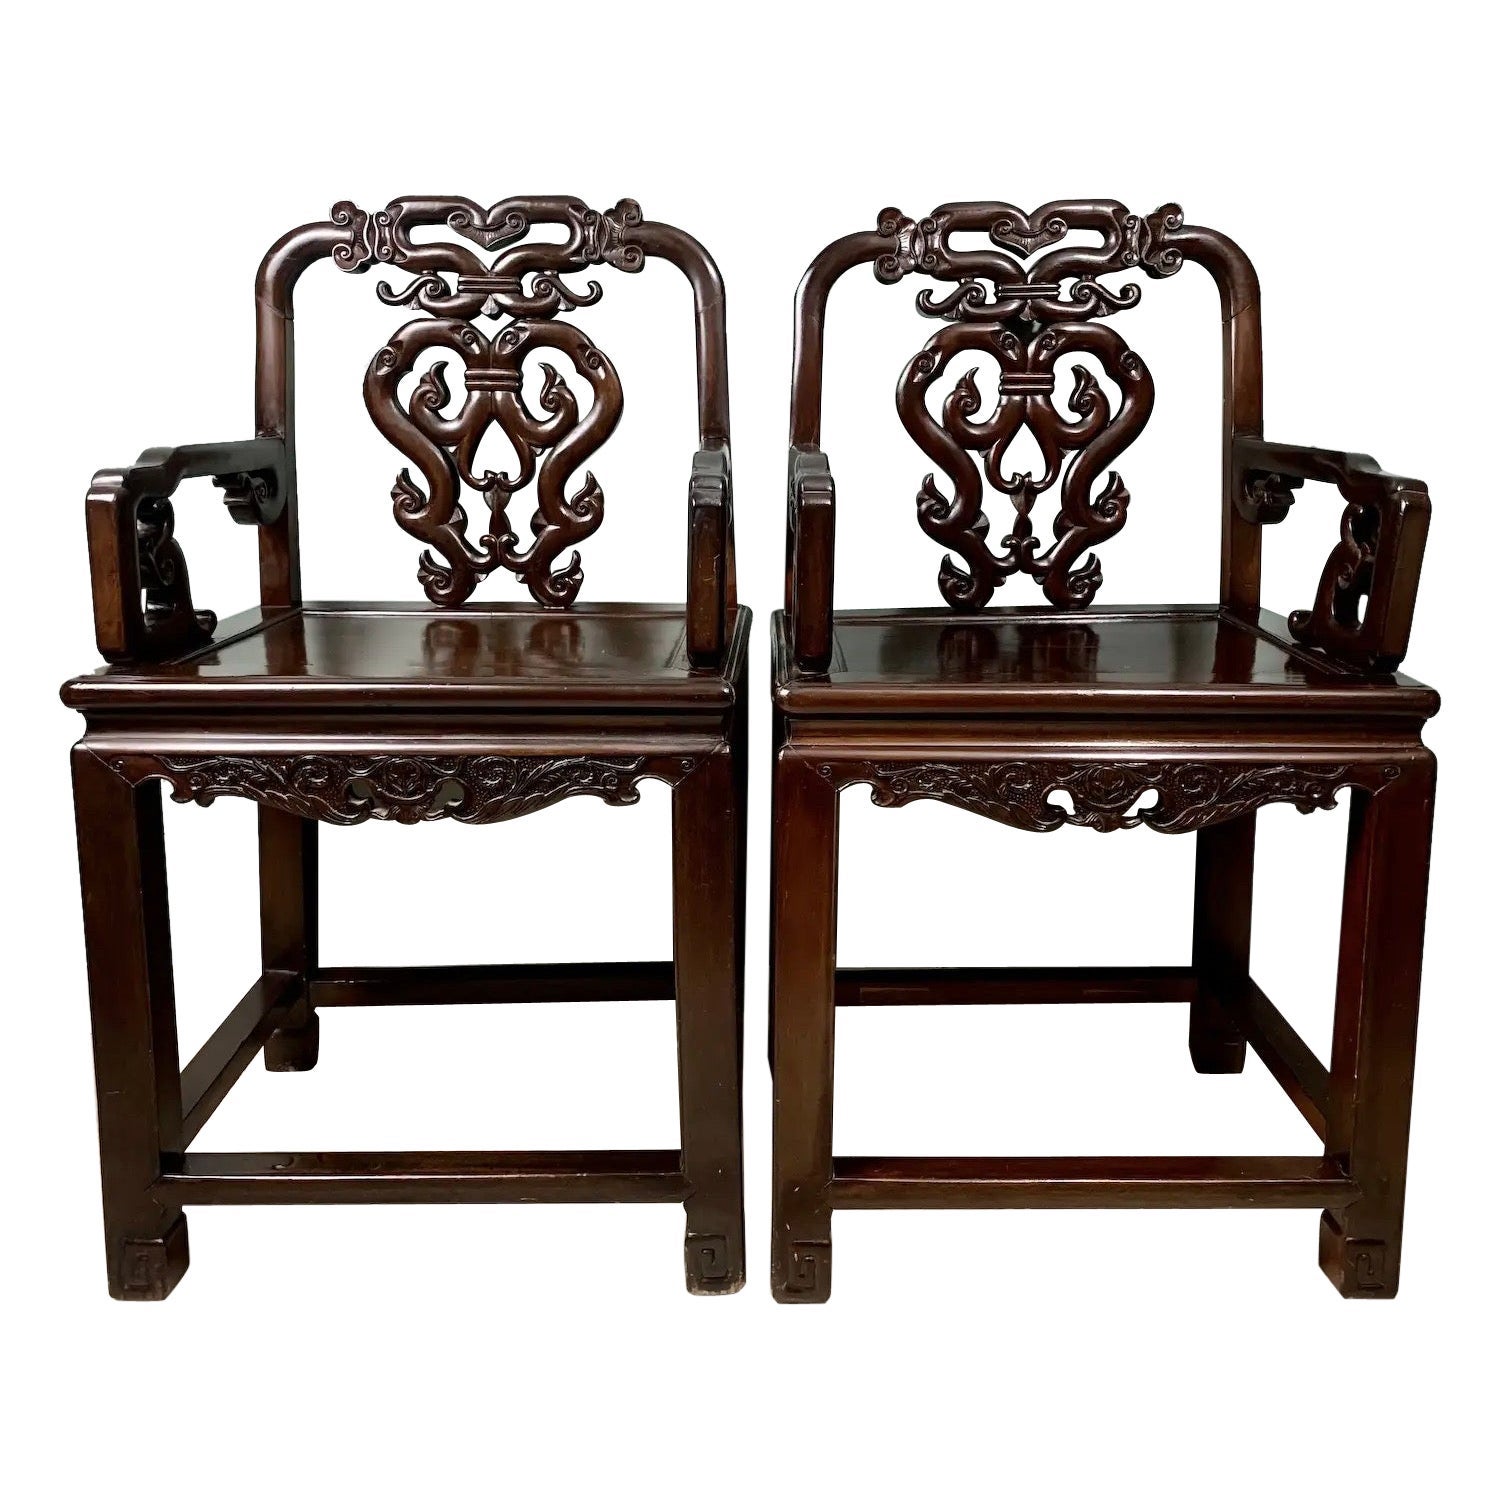 Pair of Qing Dynasty Rosewood Scholar Chairs